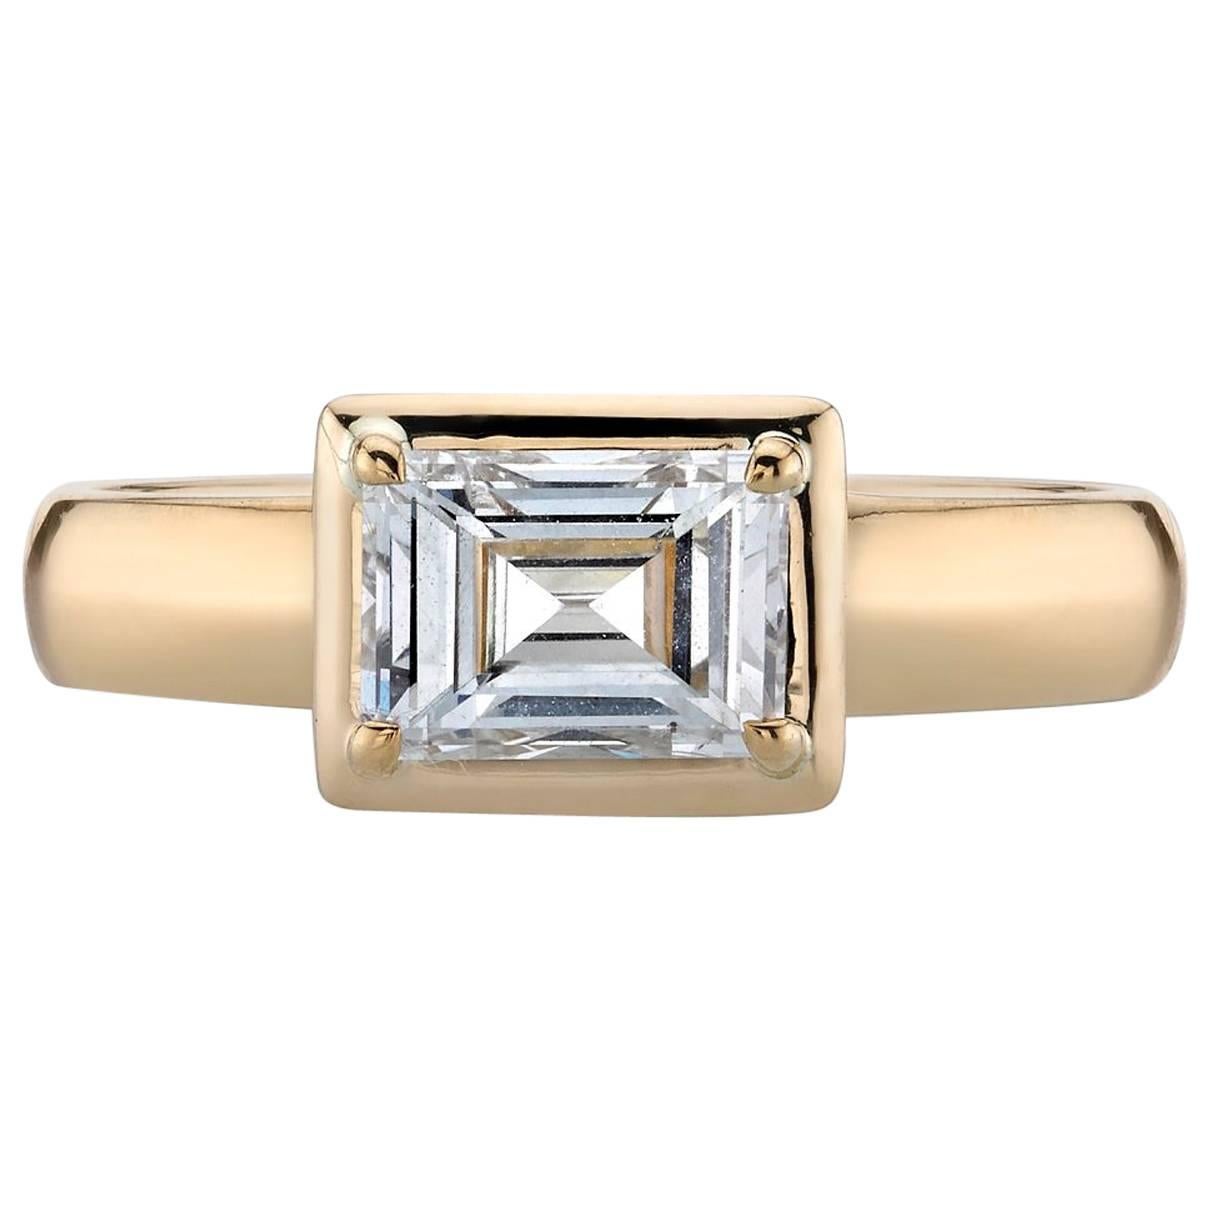 Handcrafted Zara Carré Cut Diamond Ring by Single Stone For Sale